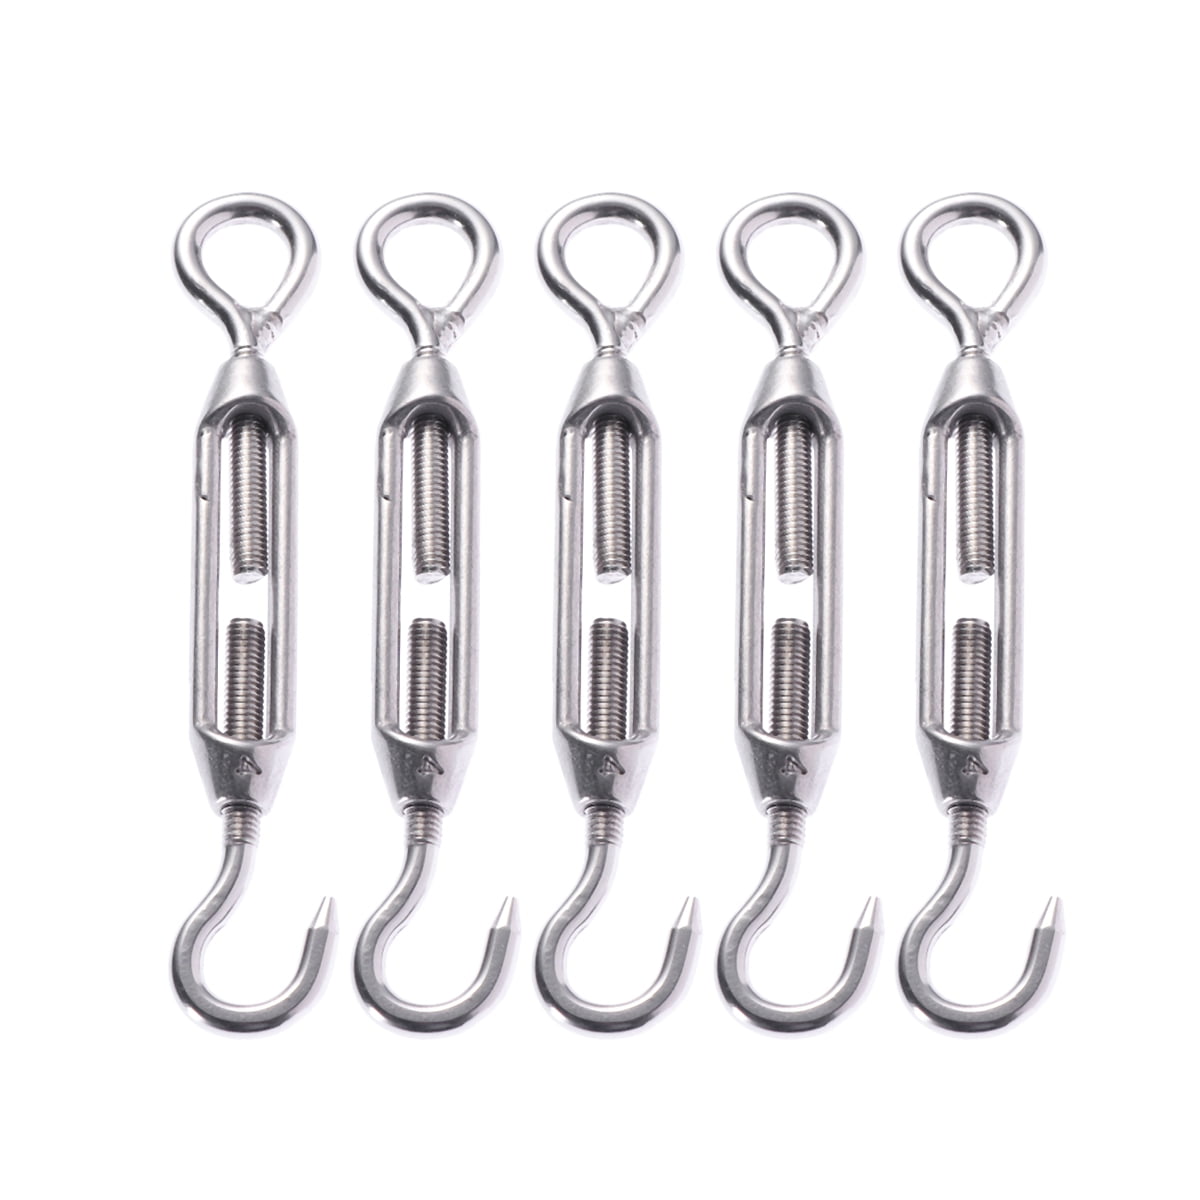 Tinksky 5pcs Stainless Steel Hook Eye Turnbuckle Wire Rope Tension